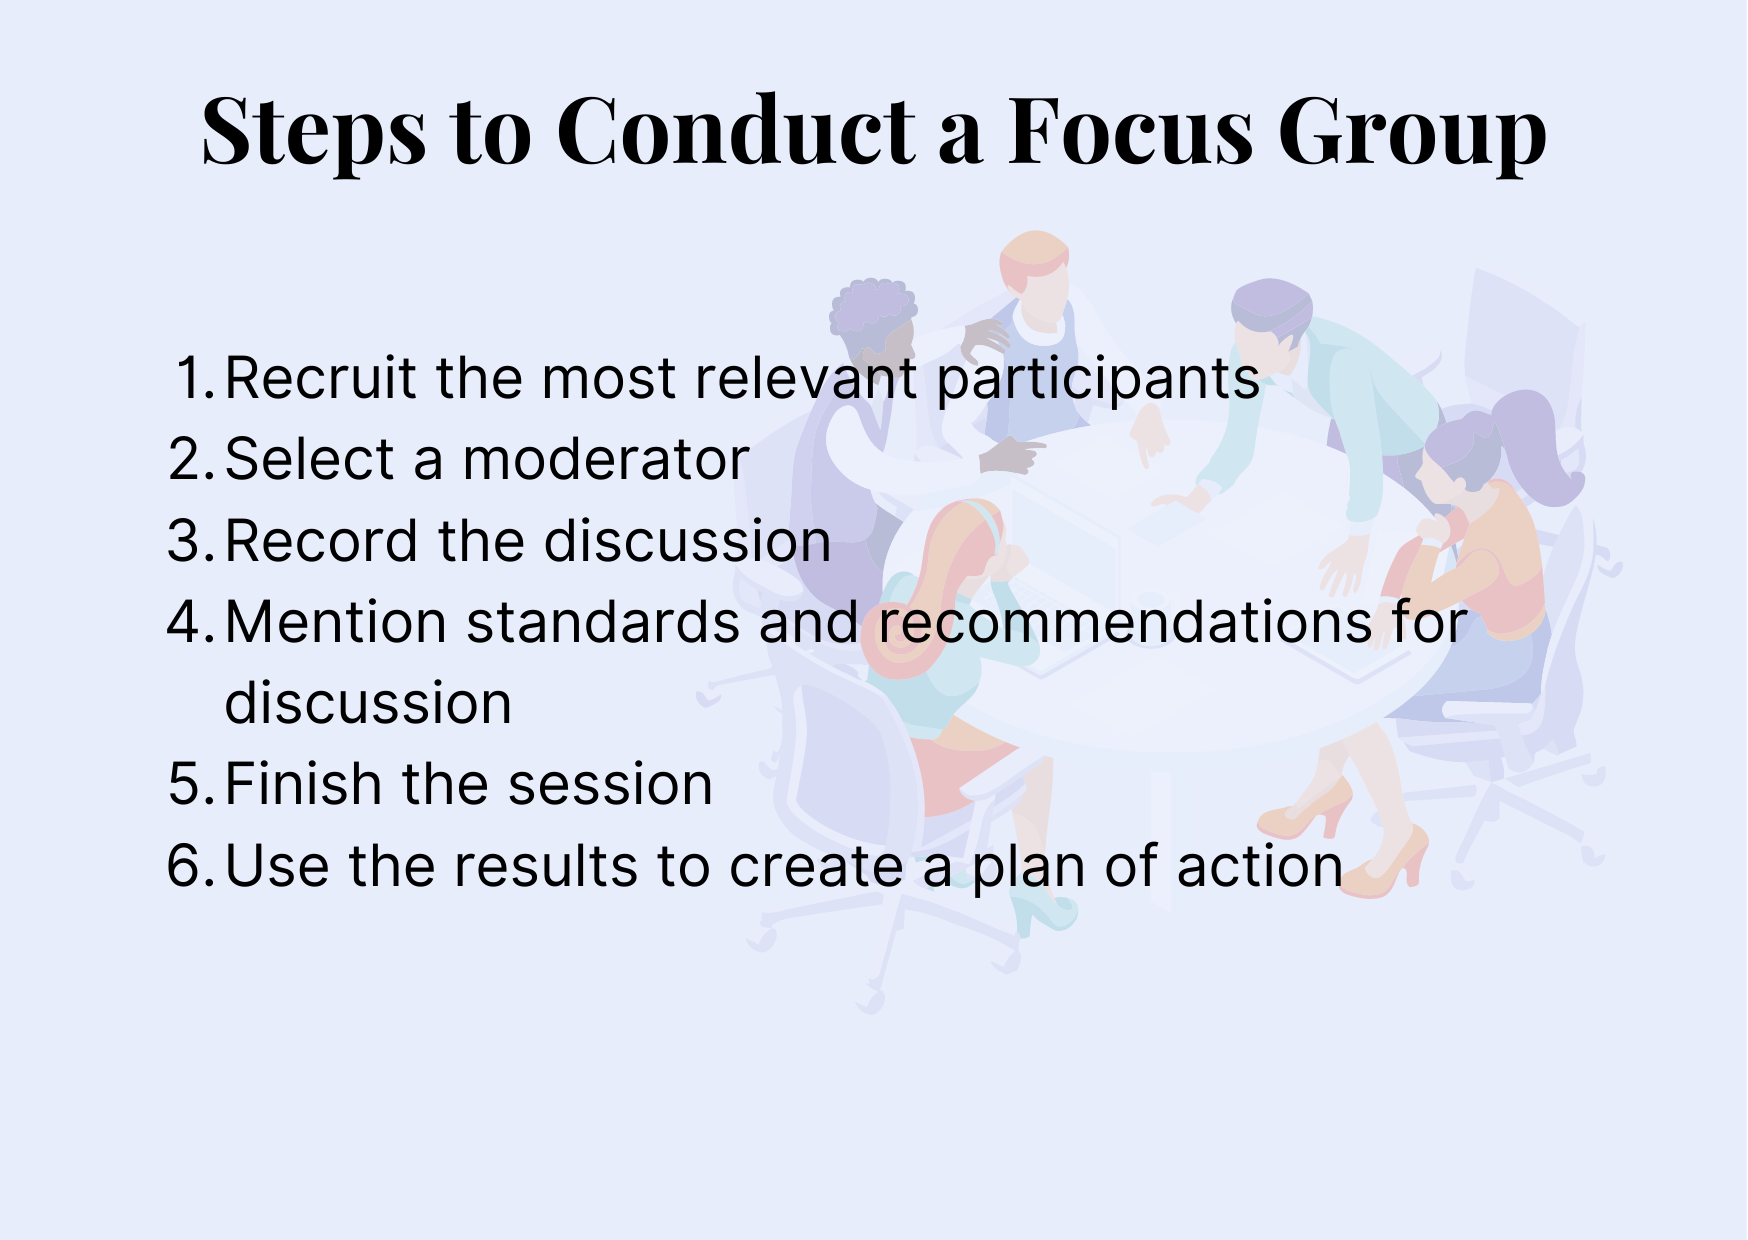 focus group steps, market research cost